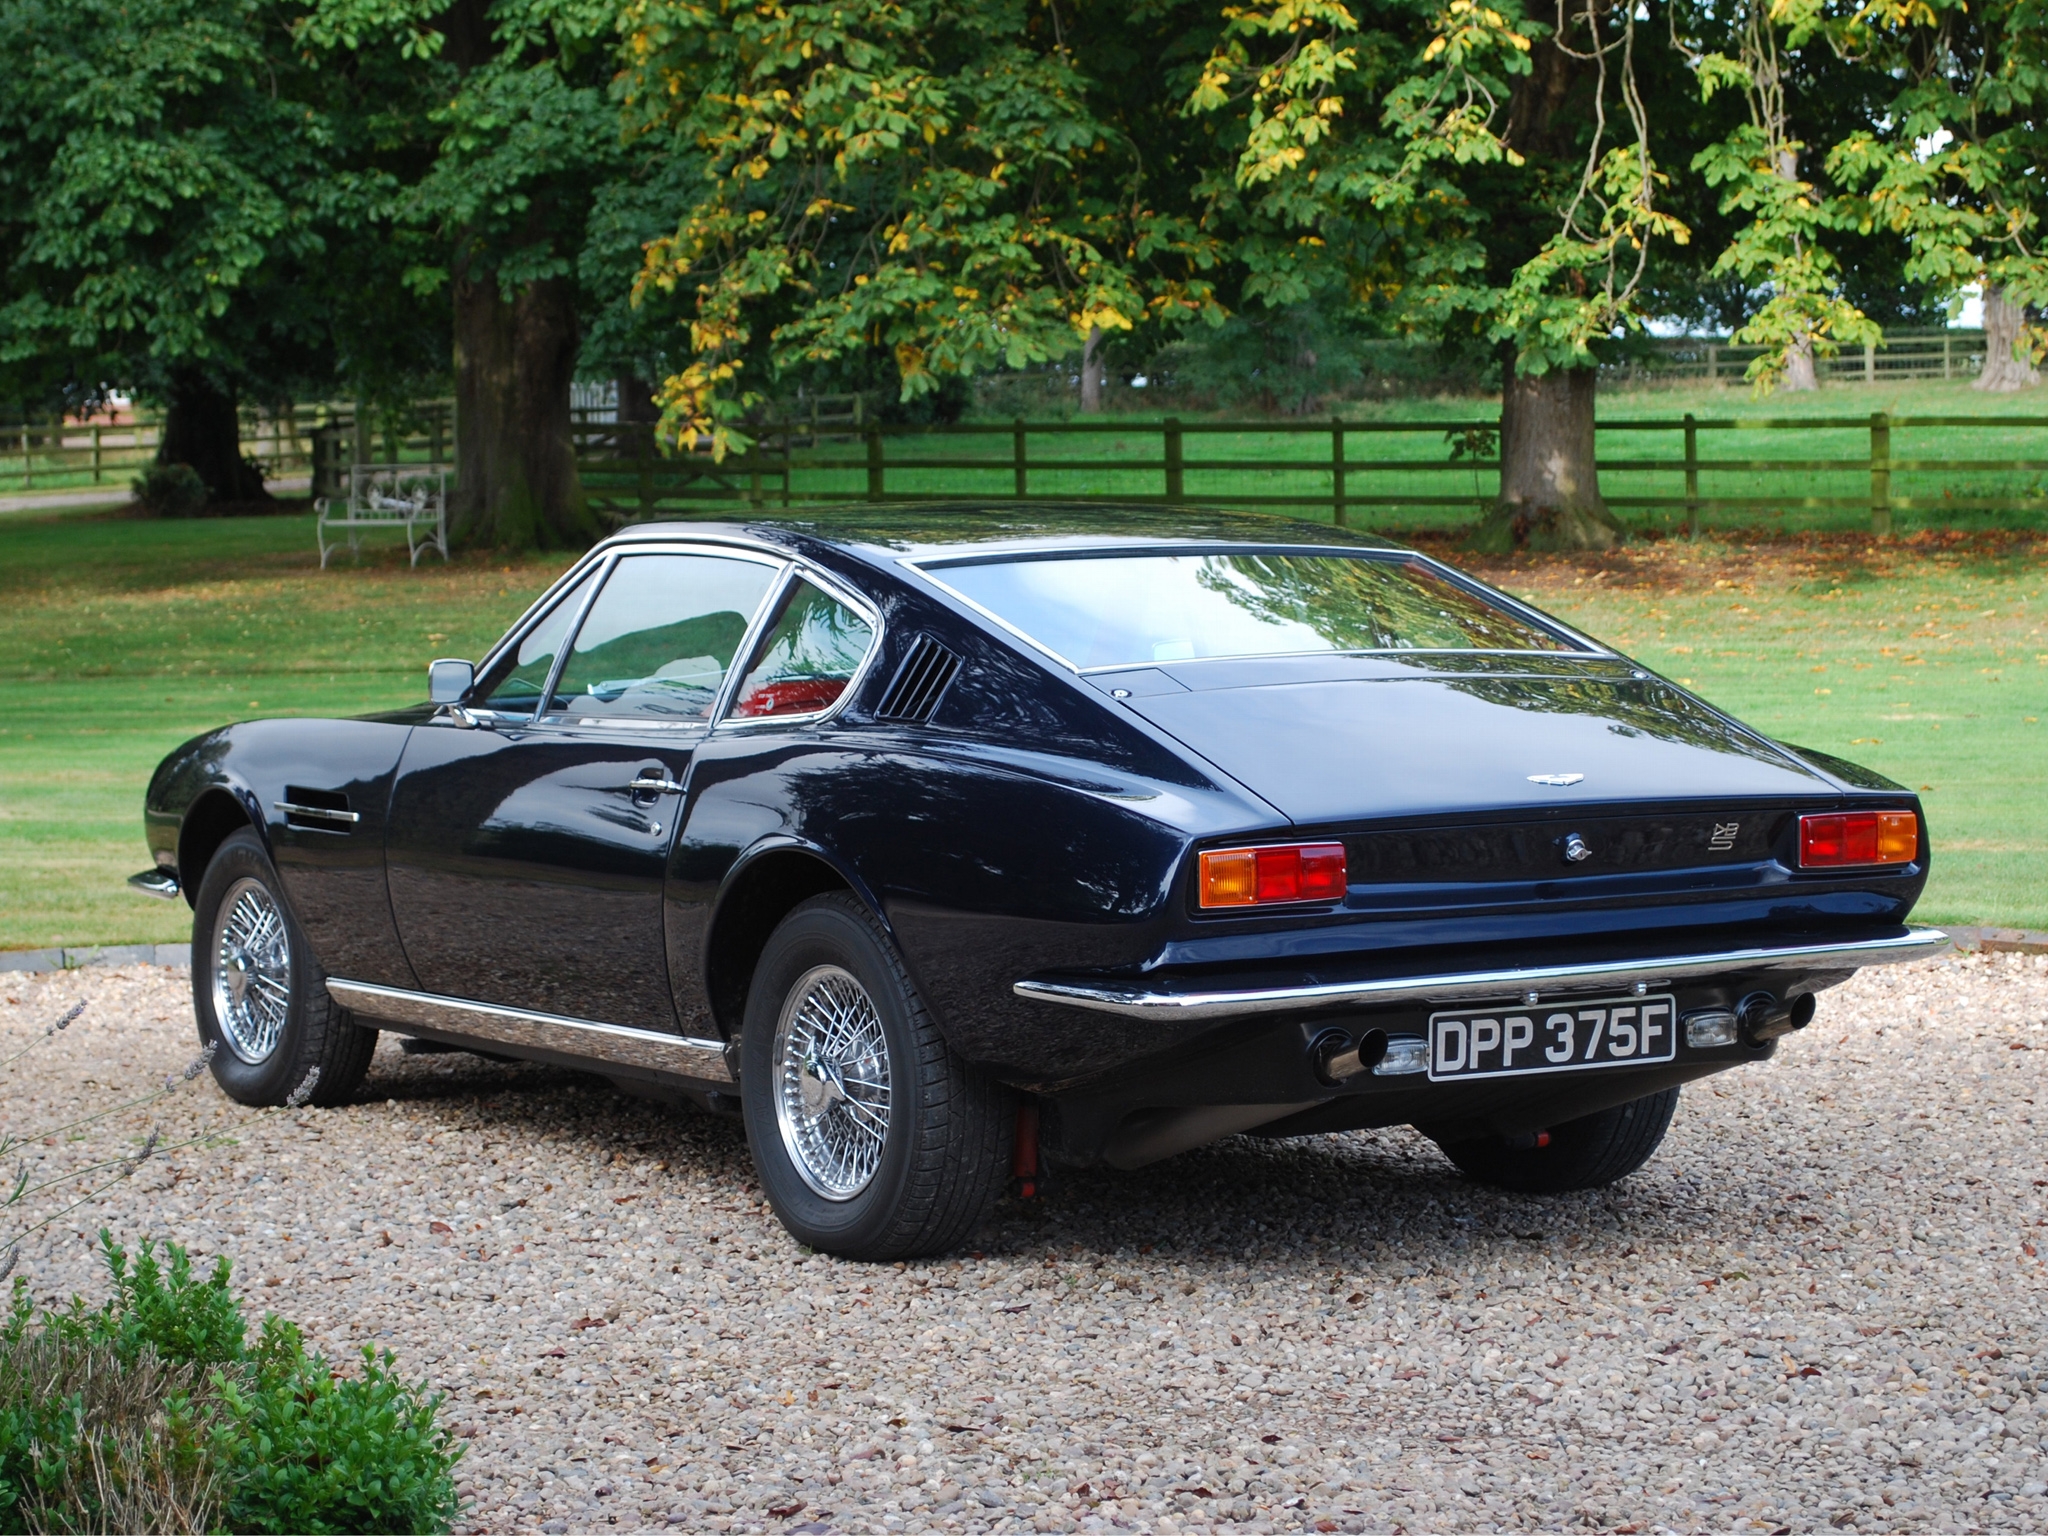 back view, auto, trees, grass, aston martin, cars, blue, rear view, 1967, dbs Image for desktop